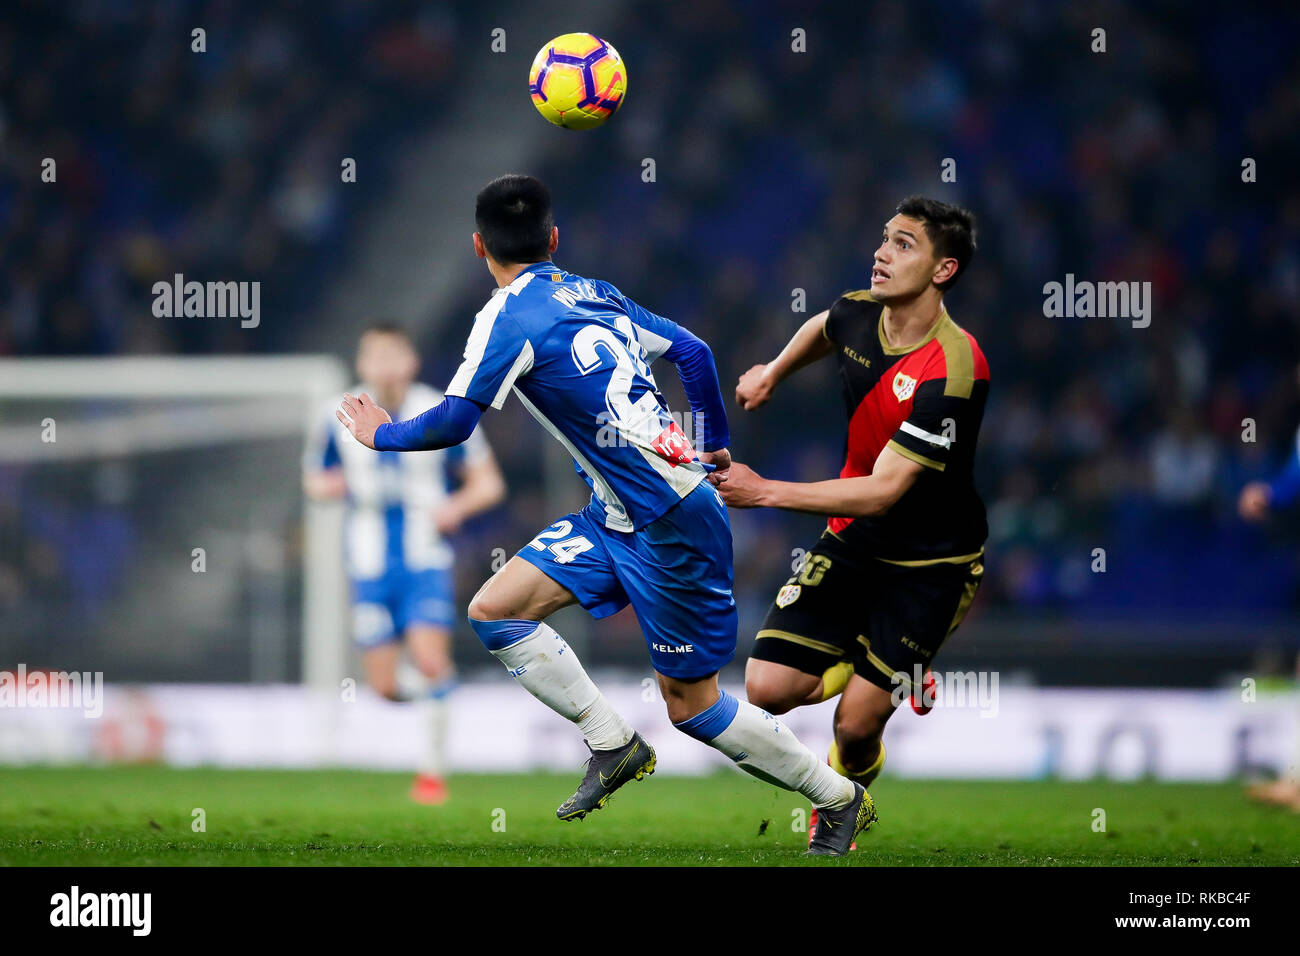 Wu Lei of RCD Espanyol challenges for the ball against Emiliano Velázquez of Rayo Vallecano during La Liga match between RCD Espanyol and Rayo Vallecano at RCDE Stadium in Barcelona. Final Score:  rcd espanyol 2 - 1 rayo vallecano. Stock Photo